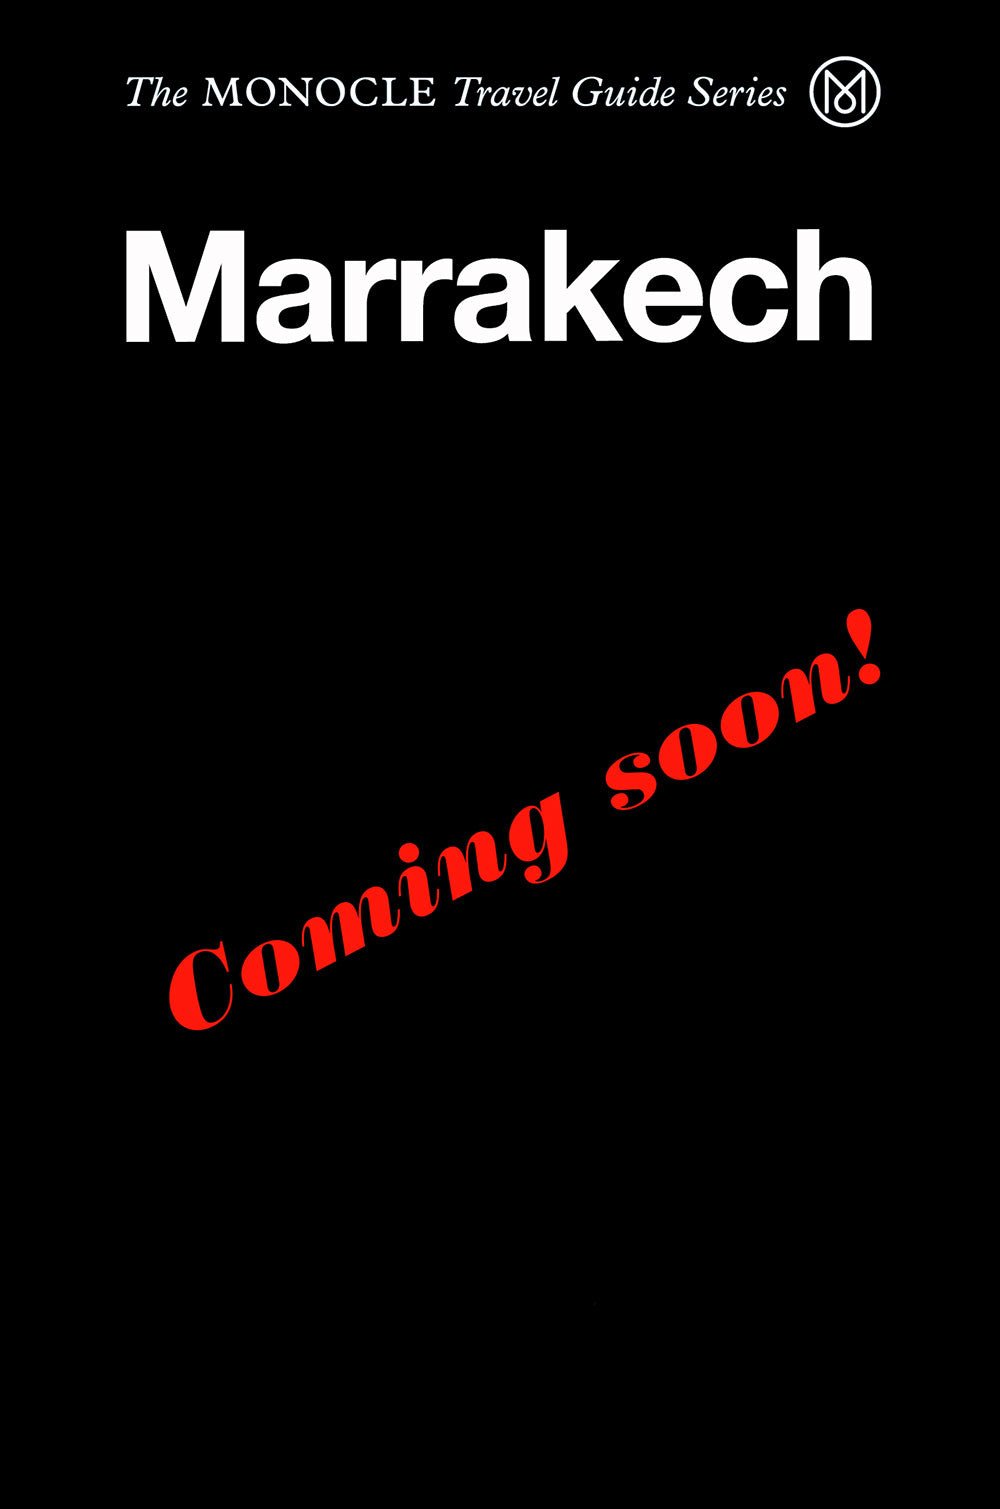 Monocle Travel Guides: Marrakech cover